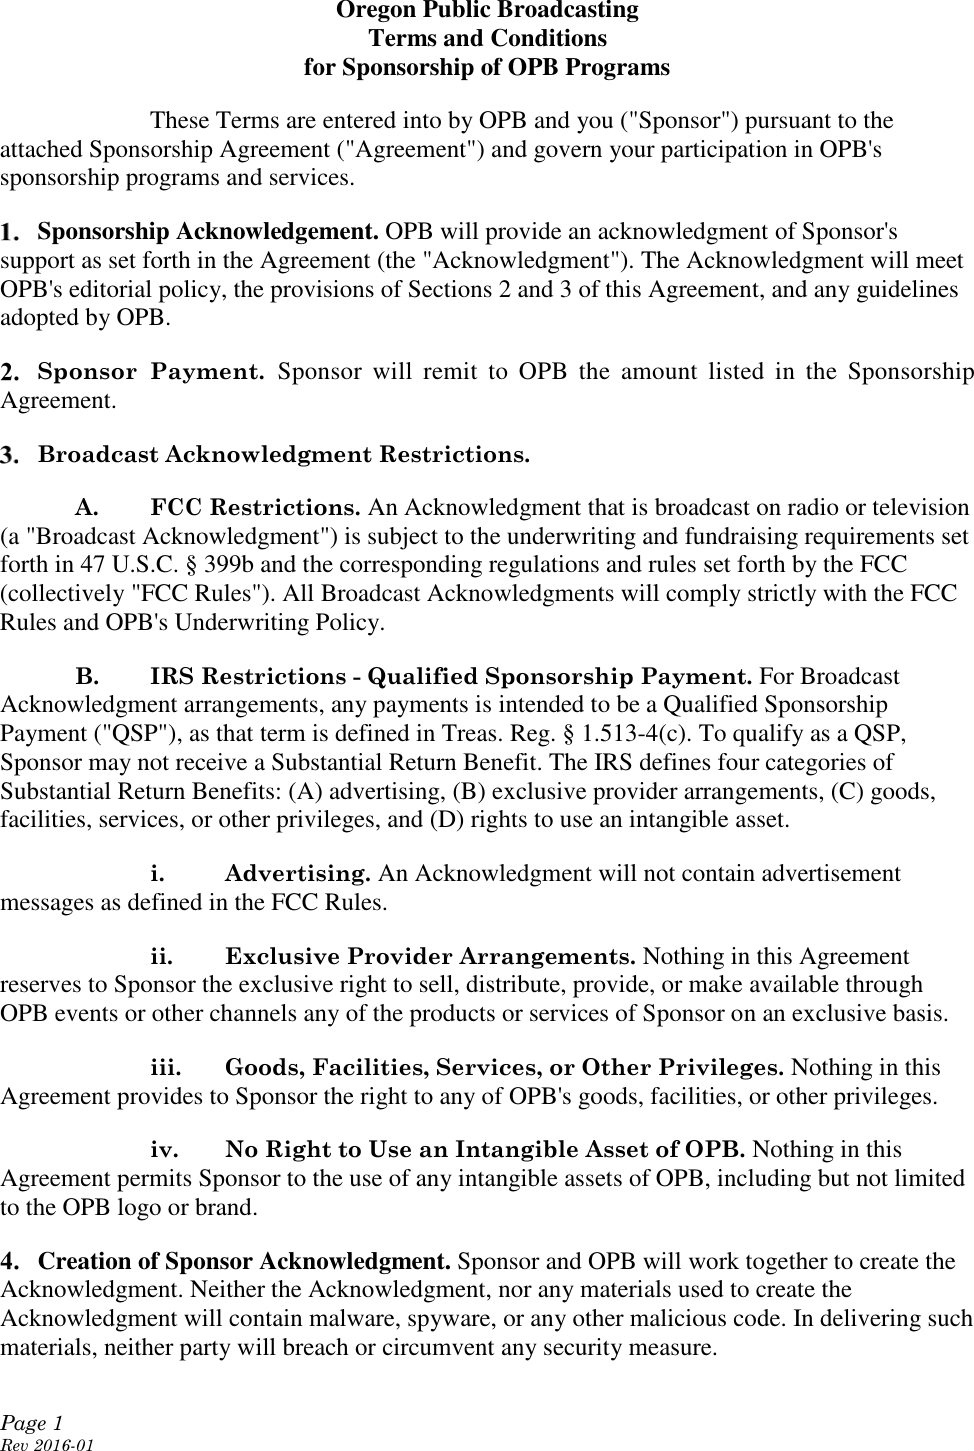 Page 1 of 2 - OPB-Sponsorship-Terms-and-Conditions--2016-02-19